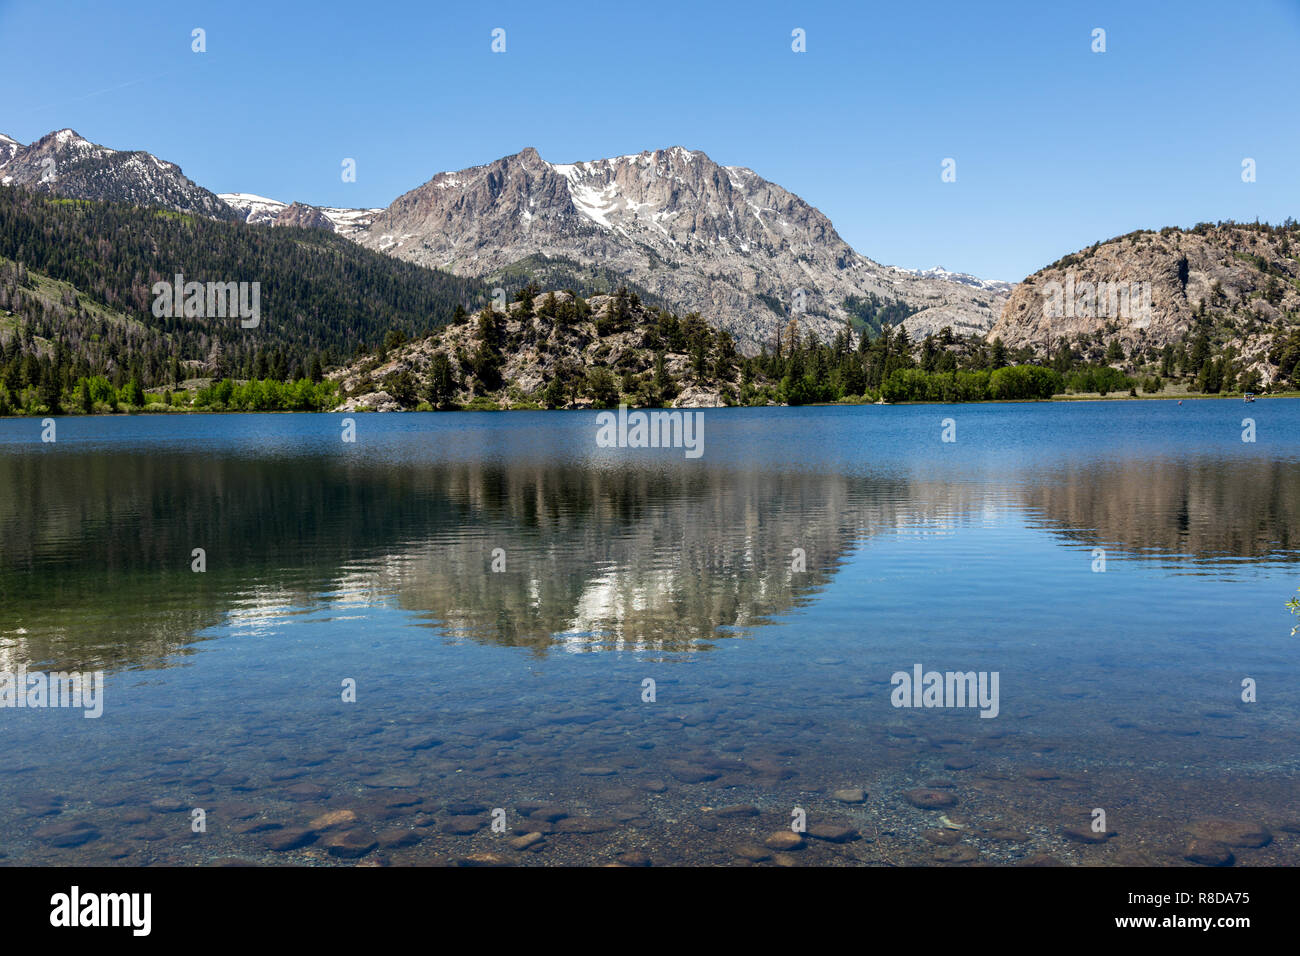 Gull Lake in Mammoth Lakes area USA. Mammoth Lakes is a town in California's Sierra Nevada mountains. It's known for the Mammoth Mountain and June Mou Stock Photo